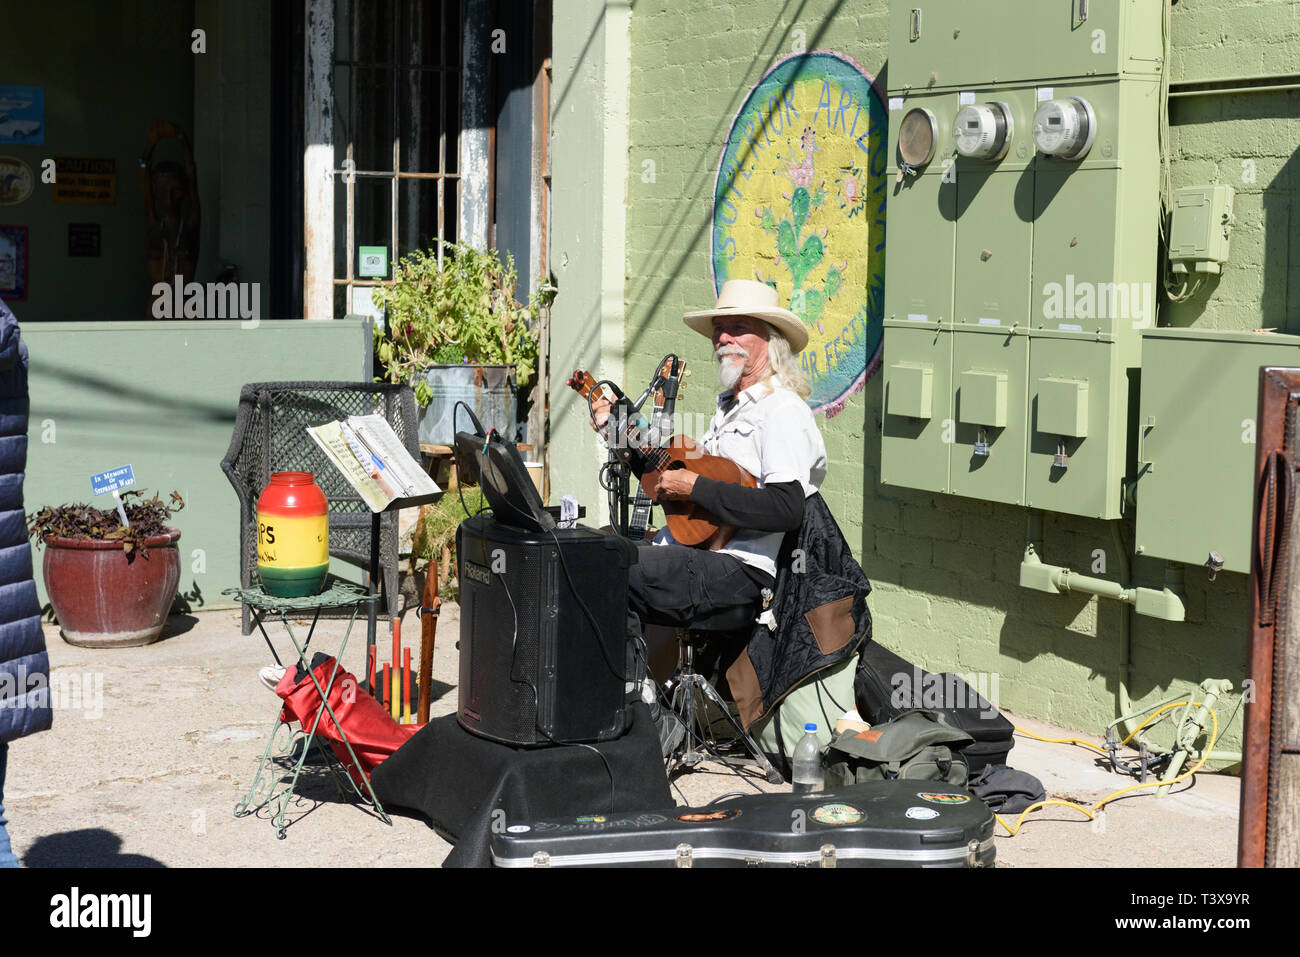 Superior, Arizona-February 8, 2019: Old cowboy with white beard plays a guitar while singing at a podium at a restaurant. Stock Photo